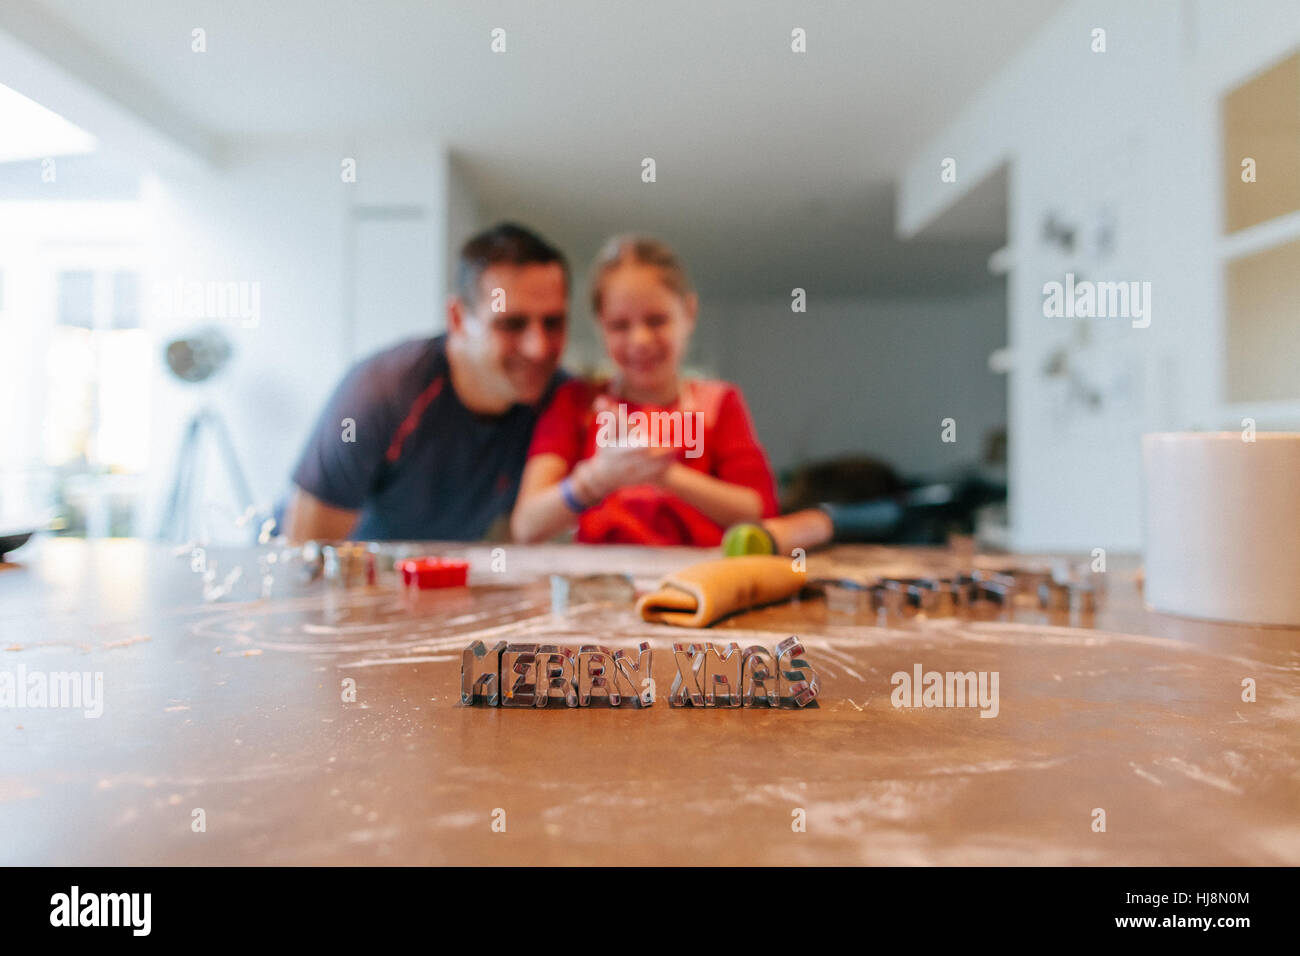 Father and daughter baking with Merry Christmas cookie cutters on table Stock Photo